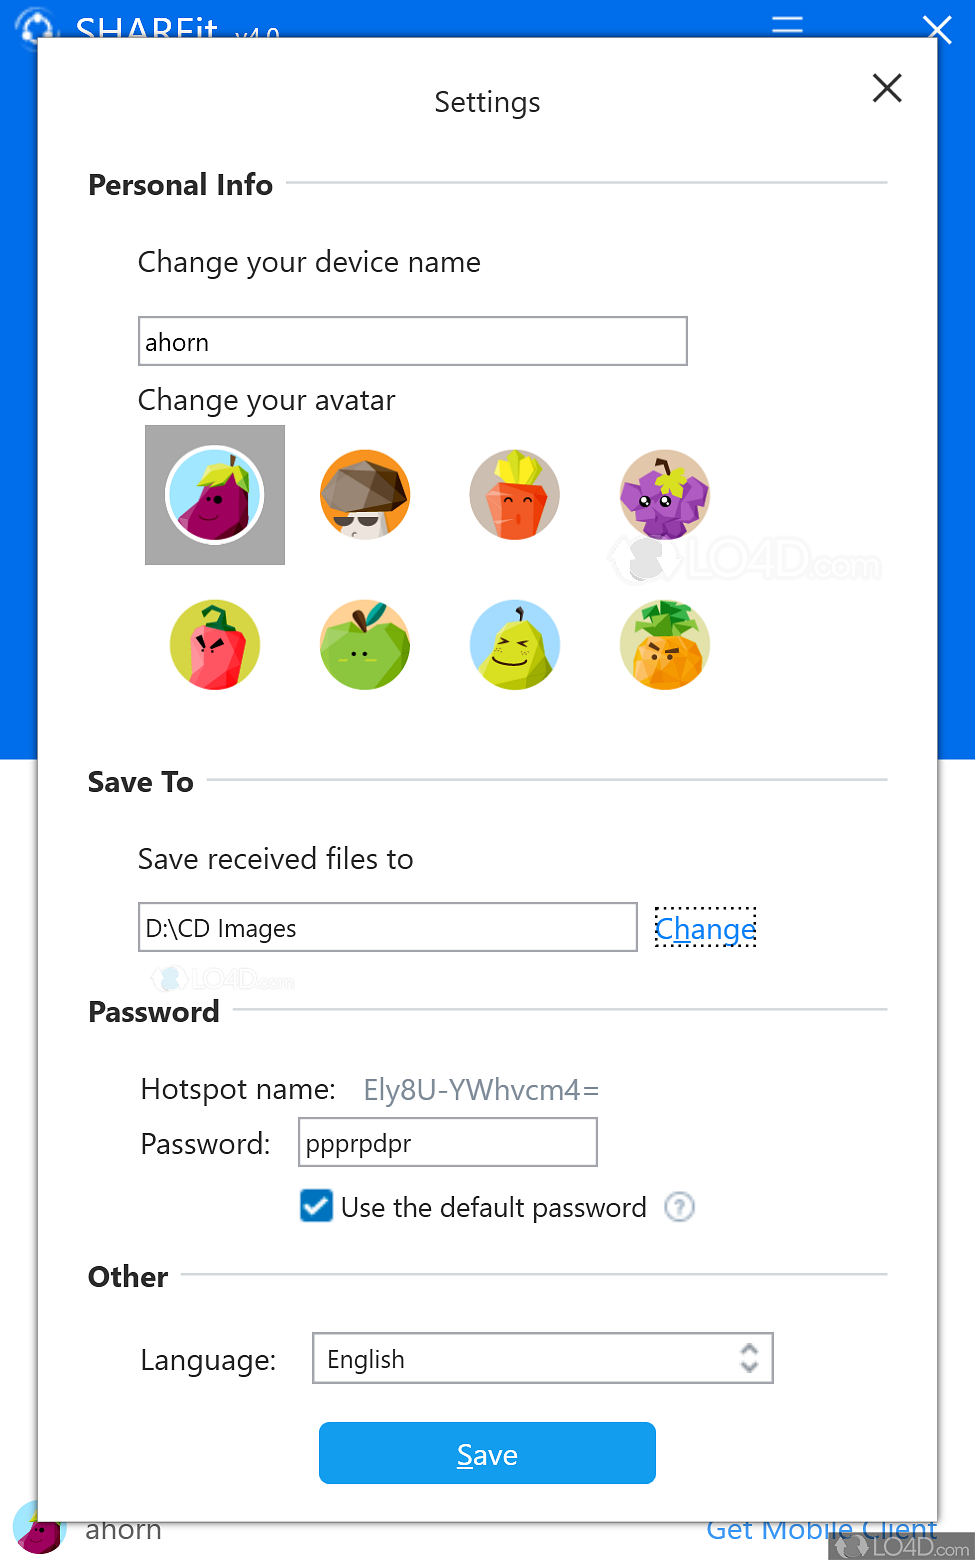 shareit 4.0 for pc free download